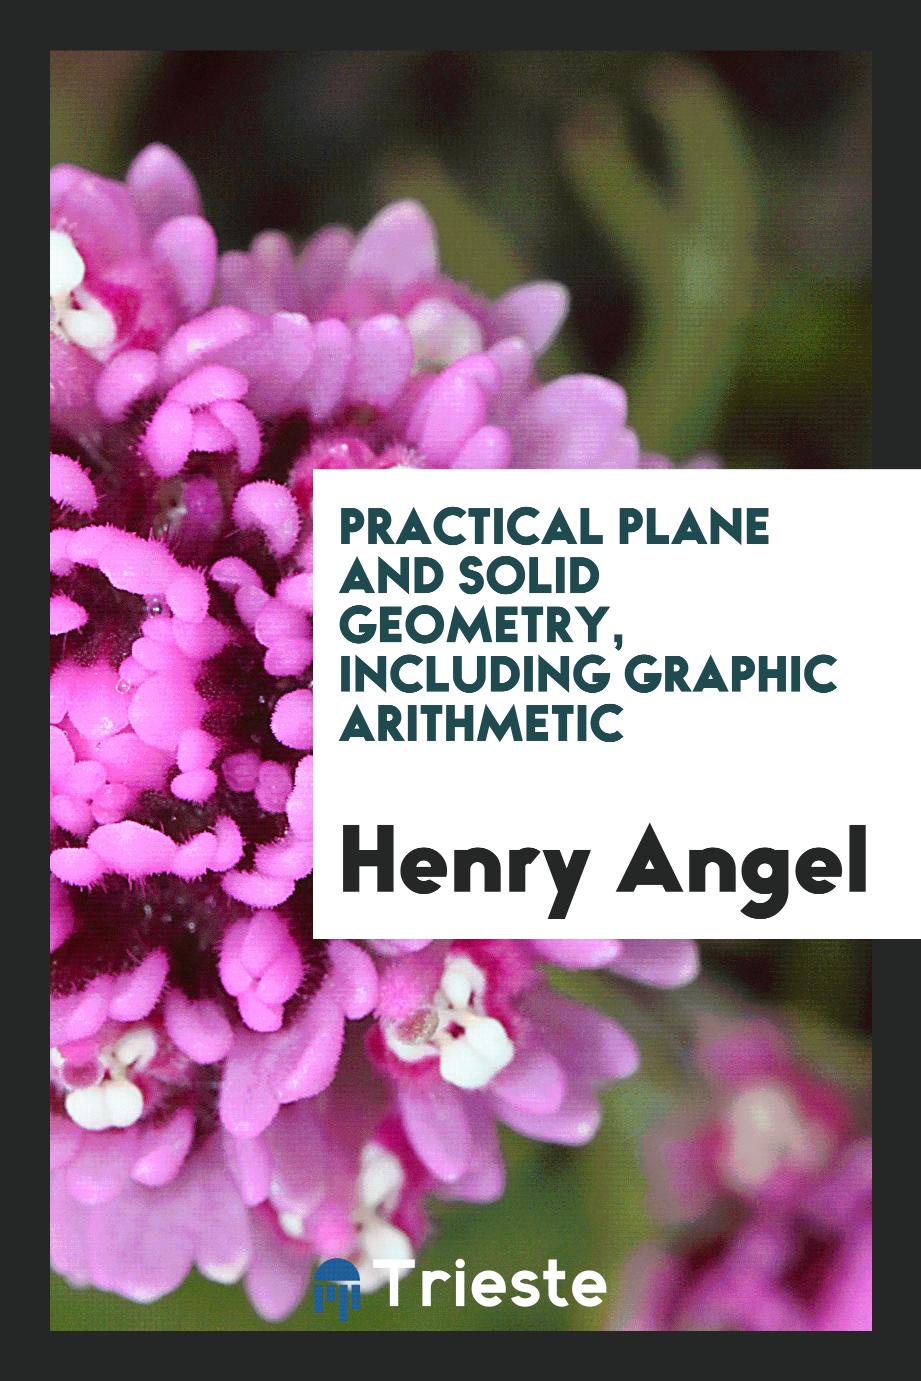 Practical plane and solid geometry, including graphic arithmetic